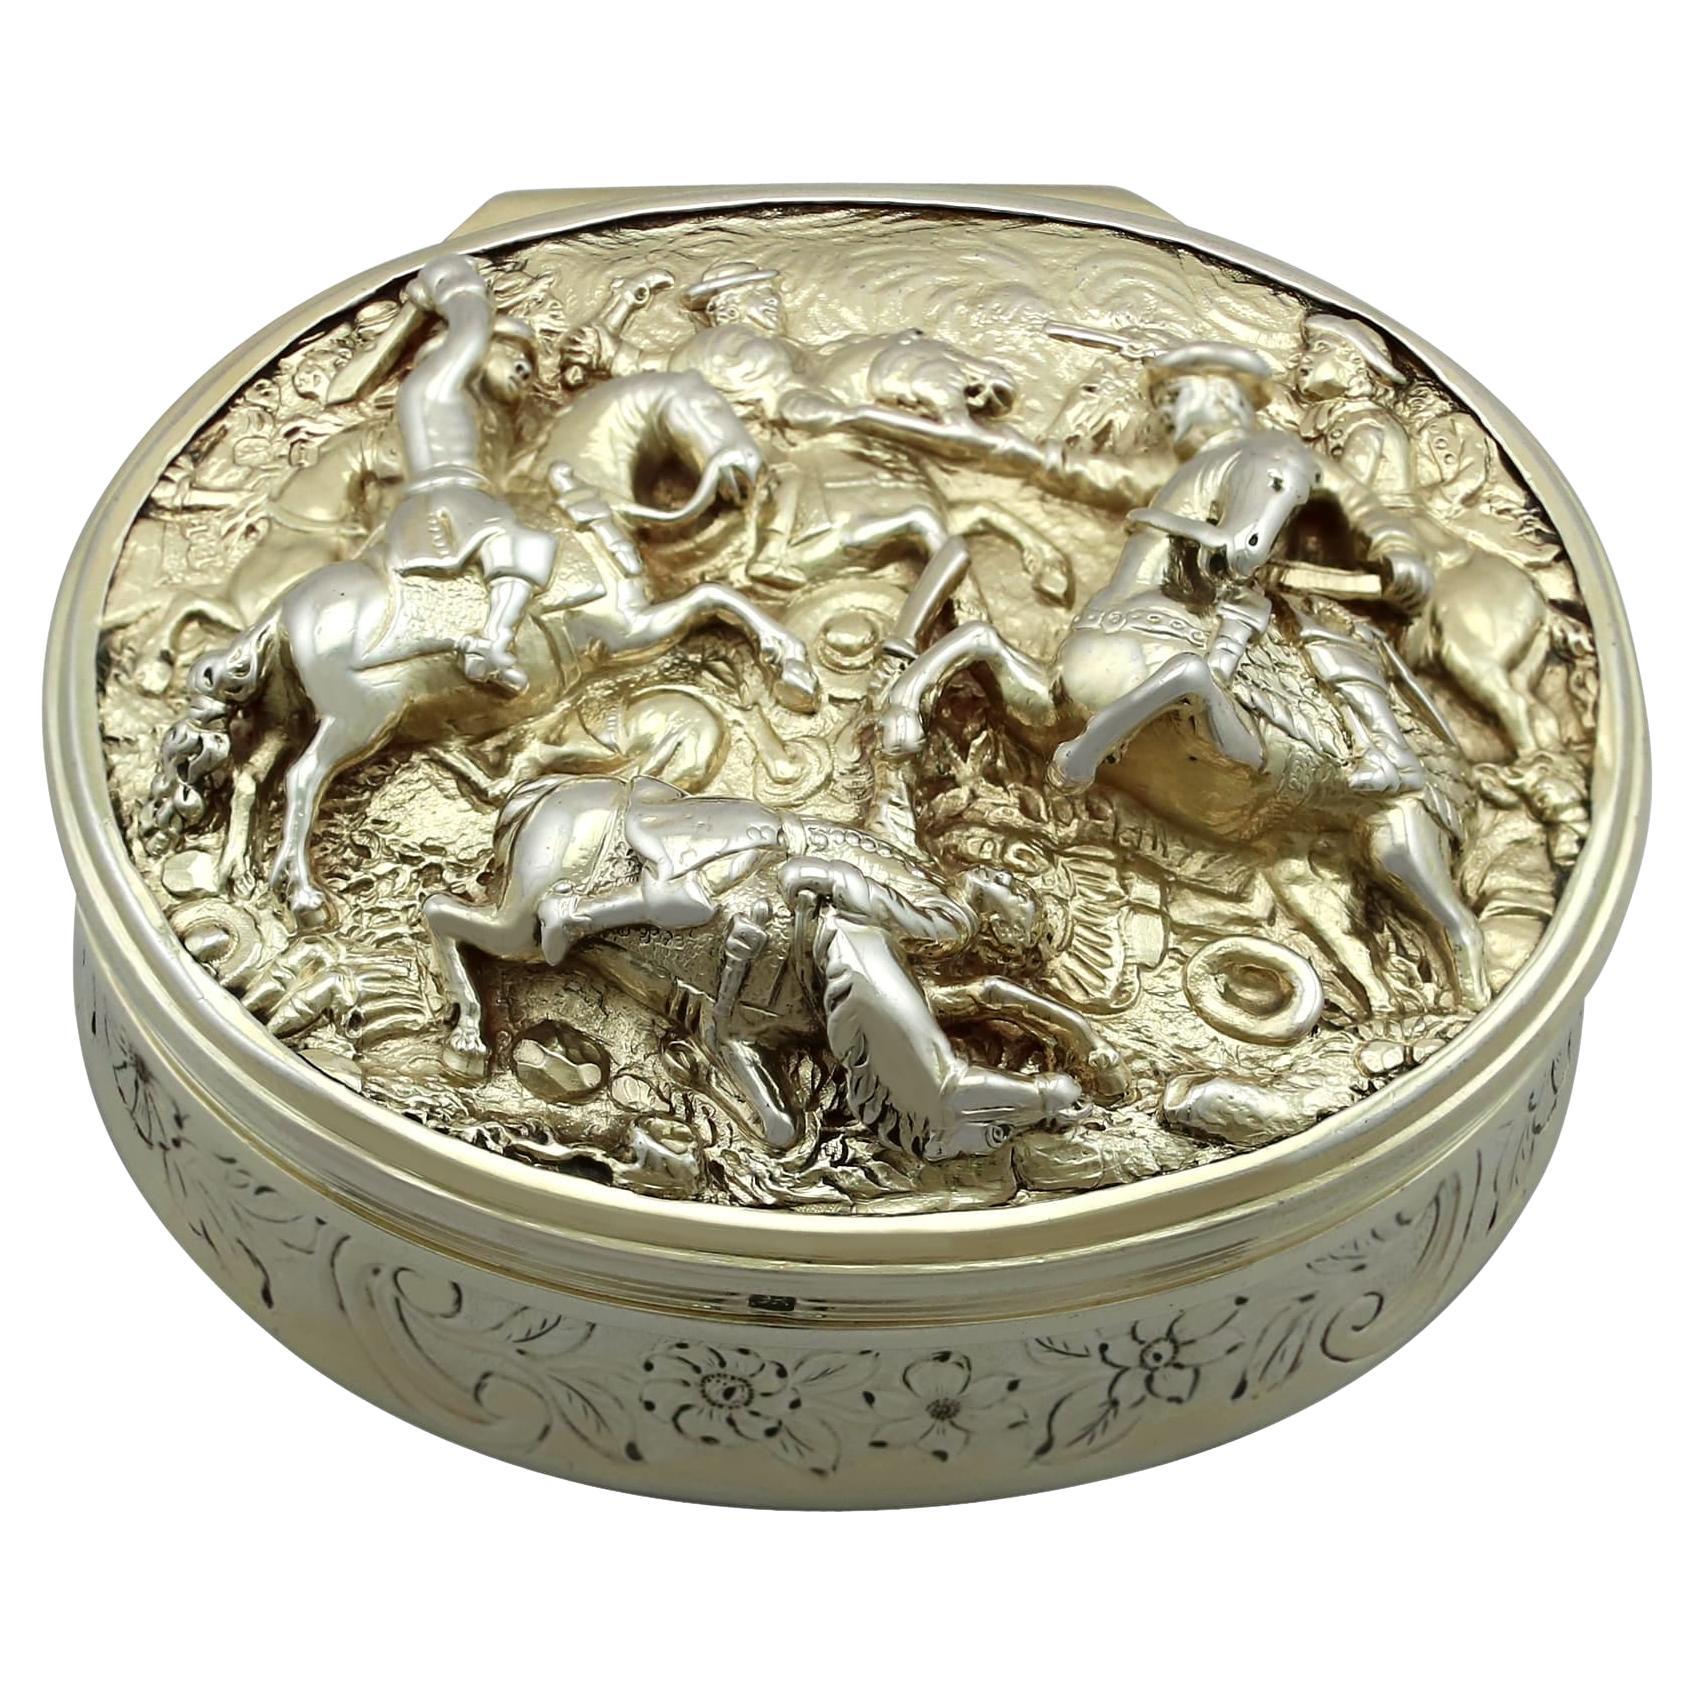 Antique George IV Sterling Silver Gilt Table Snuff Box by Edward Farrell 